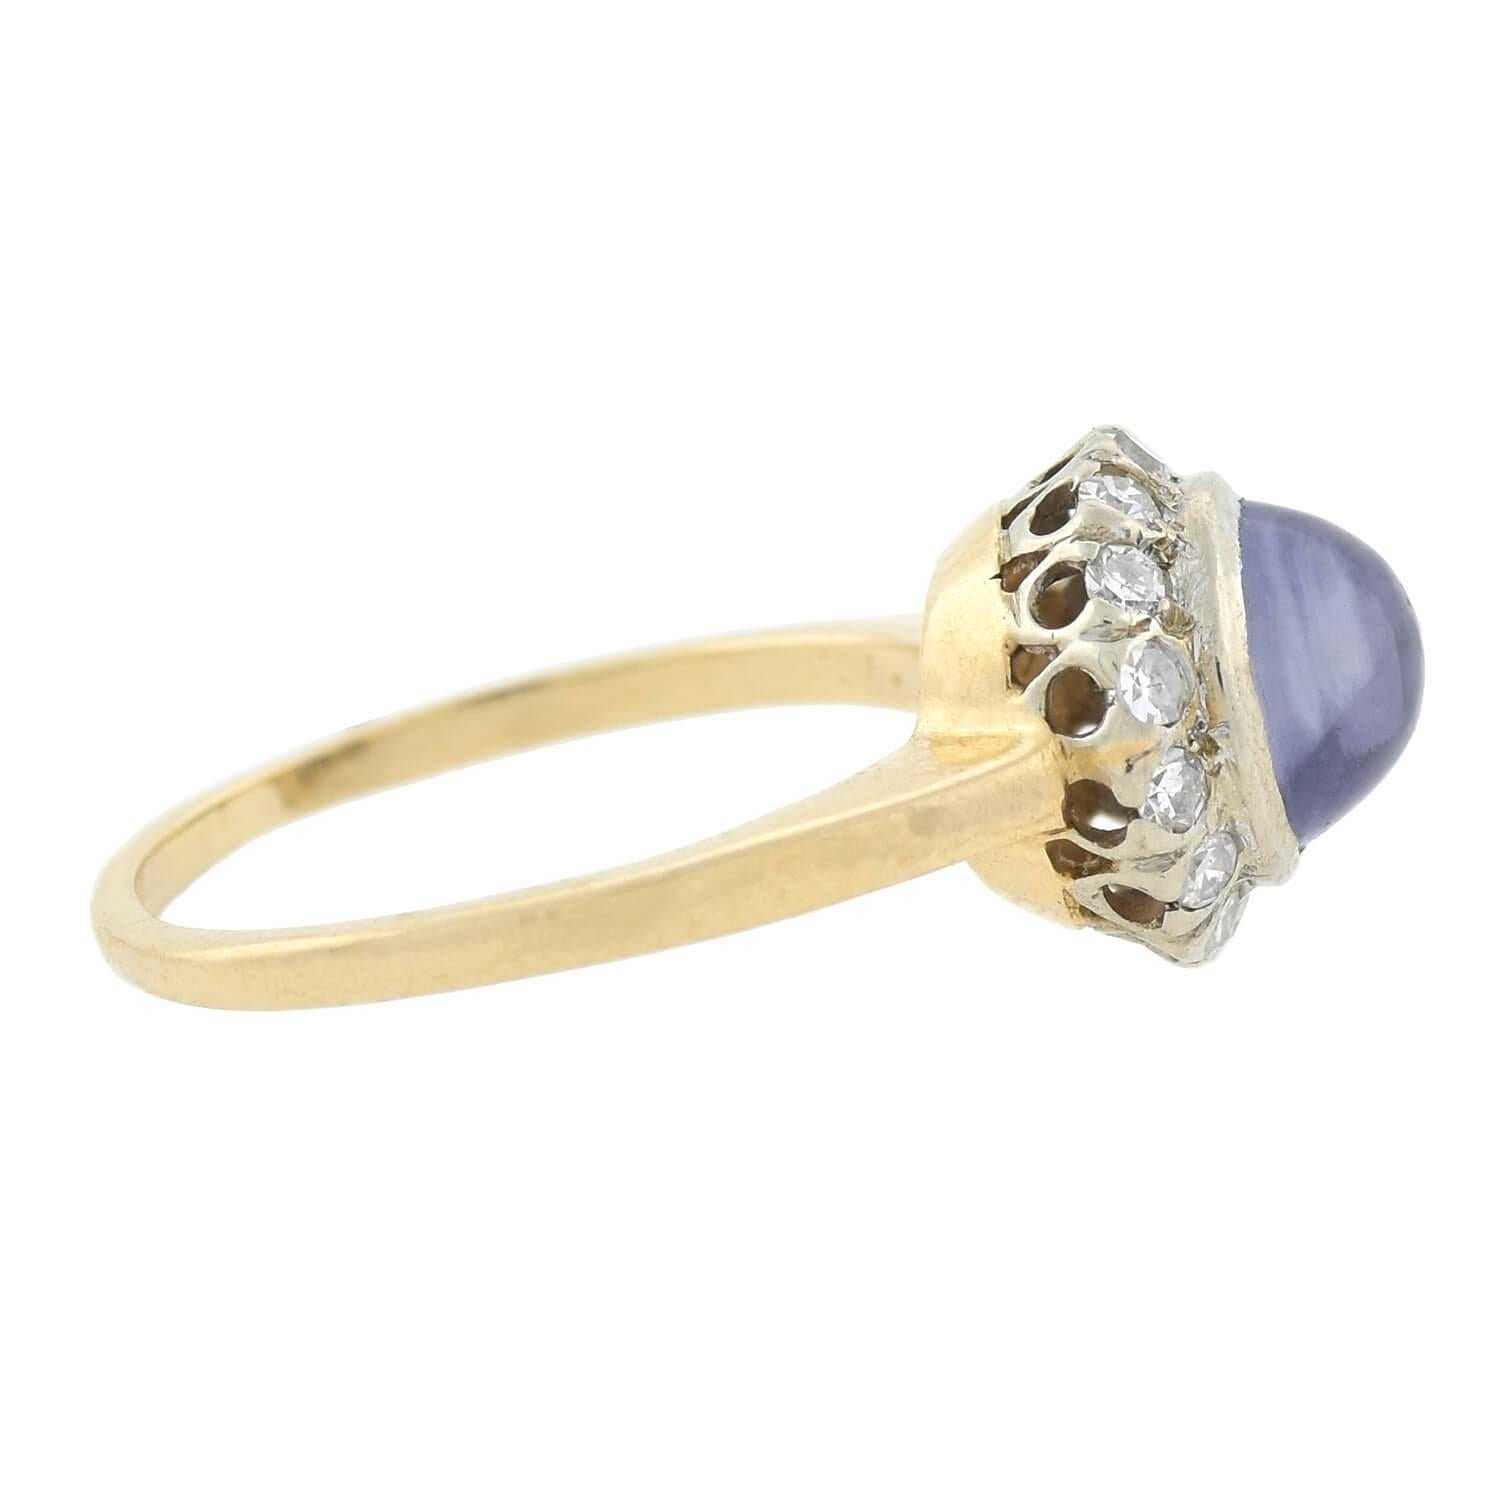 A beautiful, handmade star sapphire ring from the Edwardian (ca1910s) era! Crafted in 14kt yellow and white gold, this lovely piece features a light blue star sapphire cabochon resting in the center. The stone is bezel set and encircled by fourteen